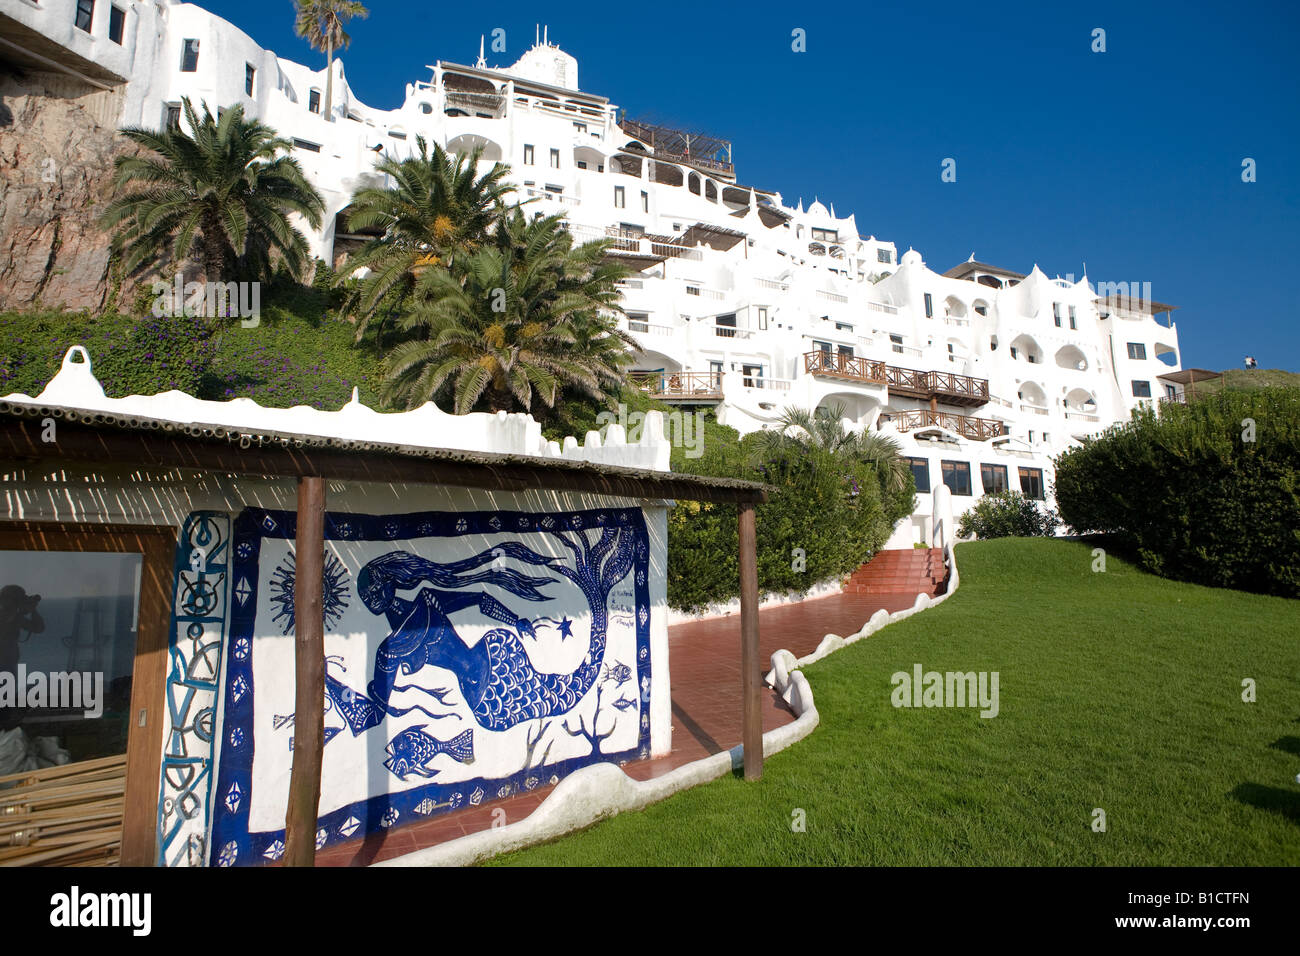 View of Casapueblo Punta del Este Uruguay from the seacoast The mural of a mermaid can be seen Stock Photo